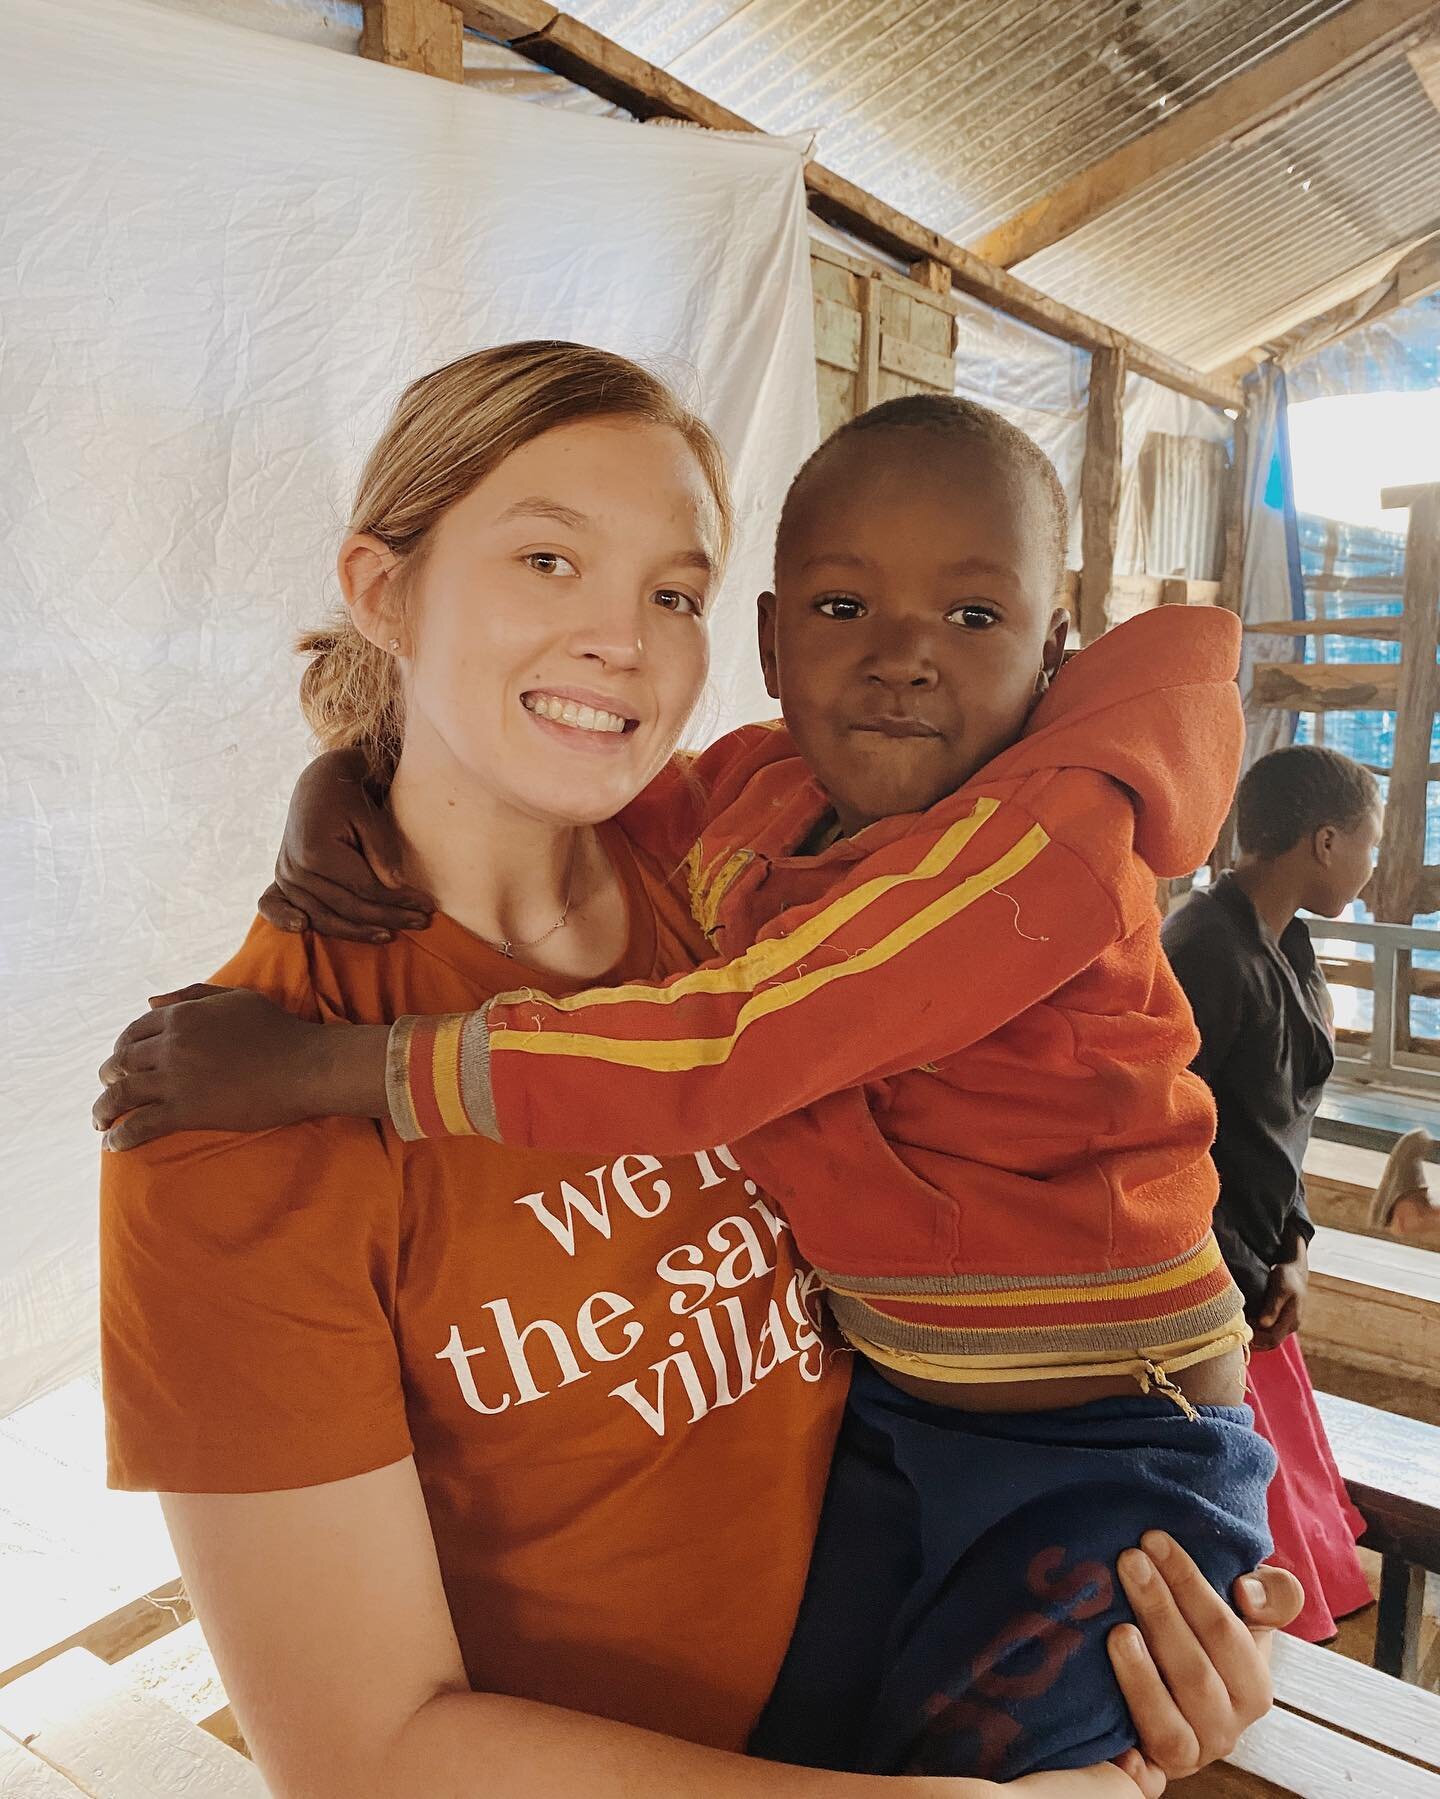 At our first day at the conference, a little boy was running up &amp; we knew he looked familiar. This boy, Abraham, was one that we connected with 3 years ago at our first visit to the Saiboku village. 

We are so grateful for the honor to love on t